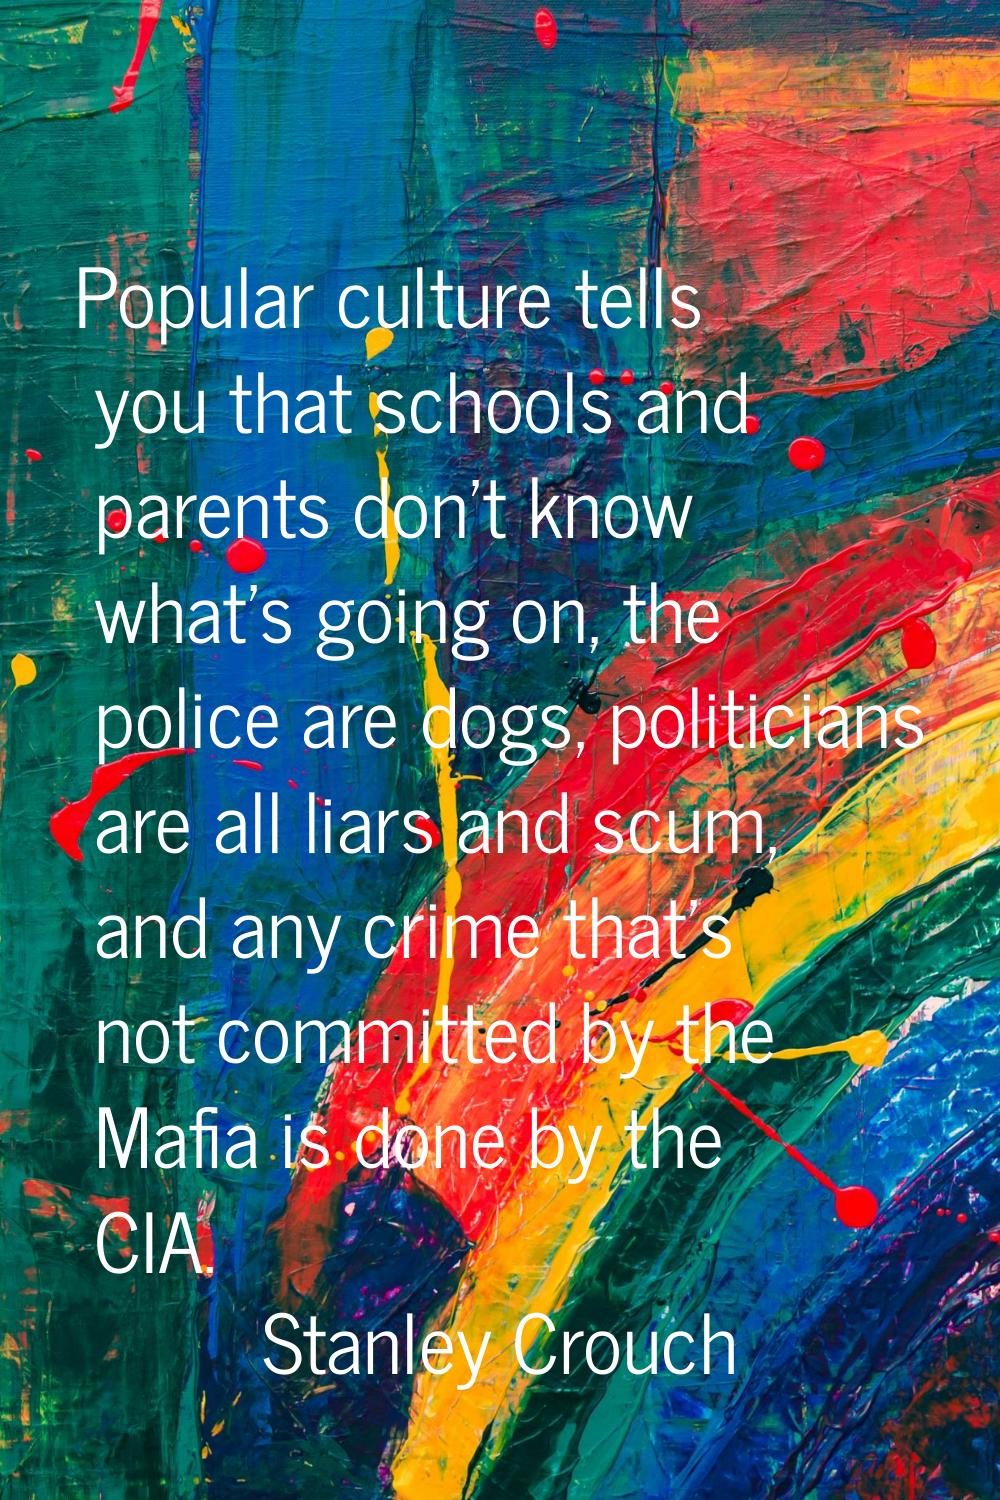 Popular culture tells you that schools and parents don't know what's going on, the police are dogs,